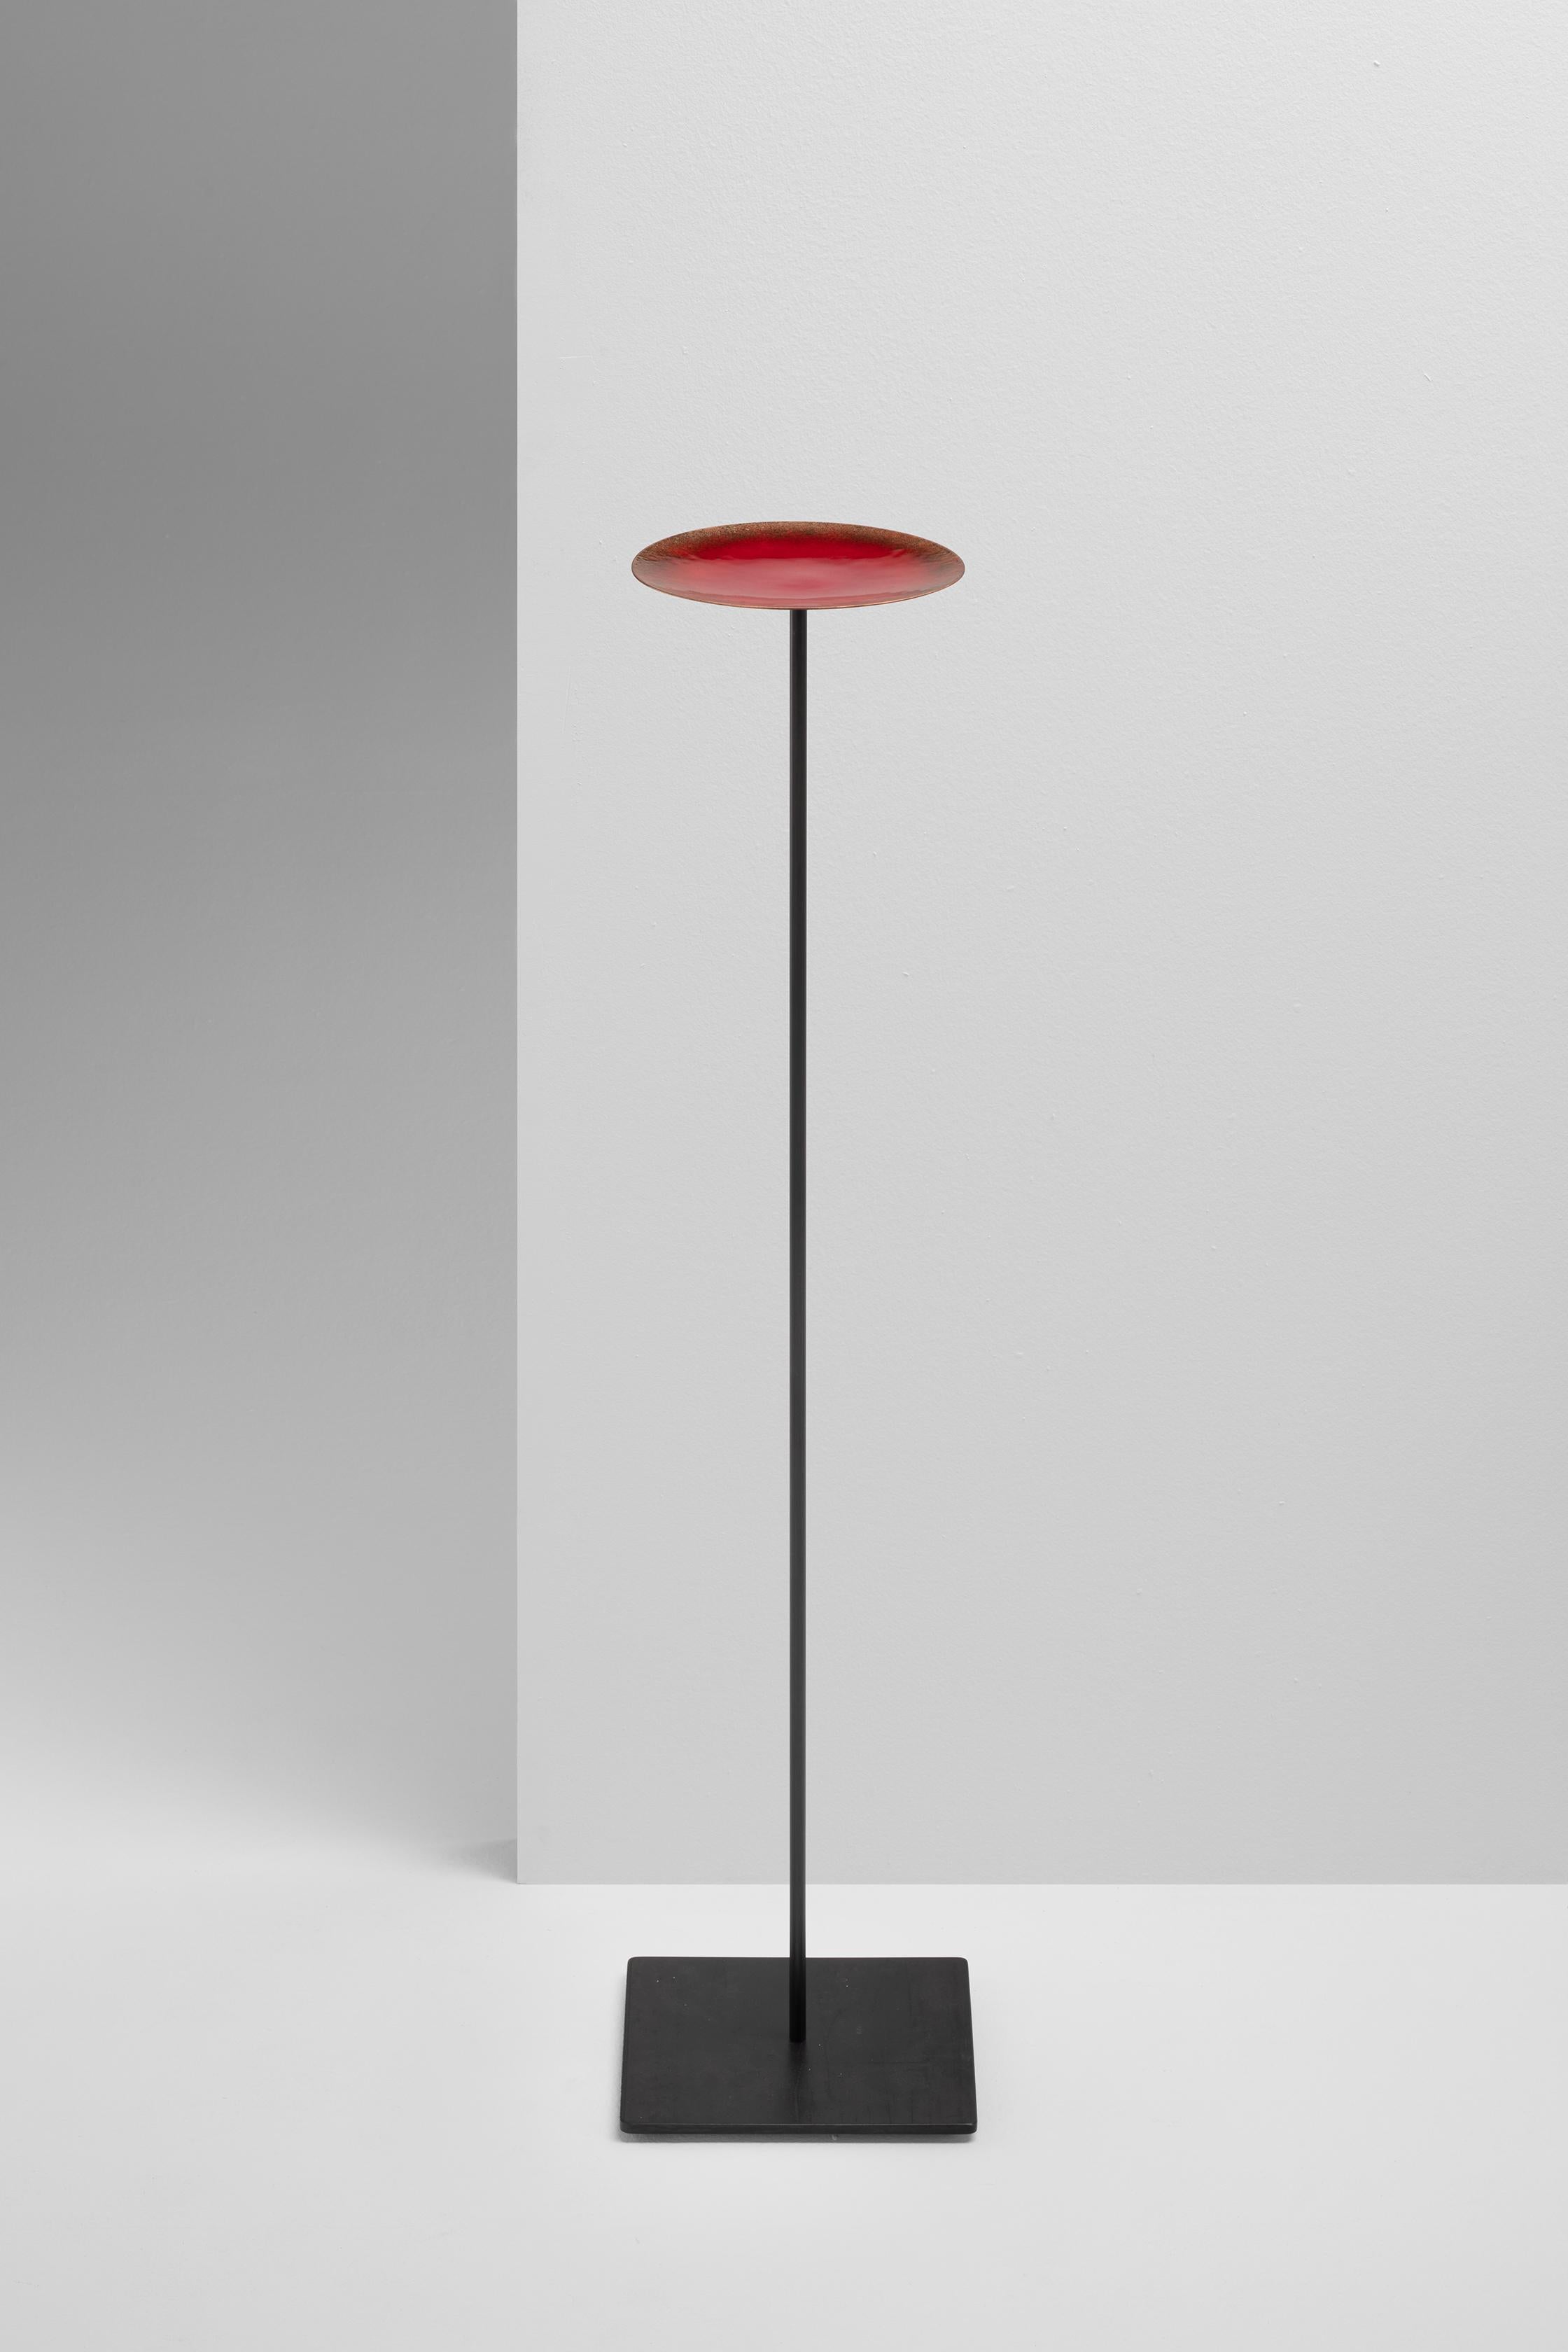 Specola, Dish on Floor Stand, Fire Enamel on Copper For Sale 3